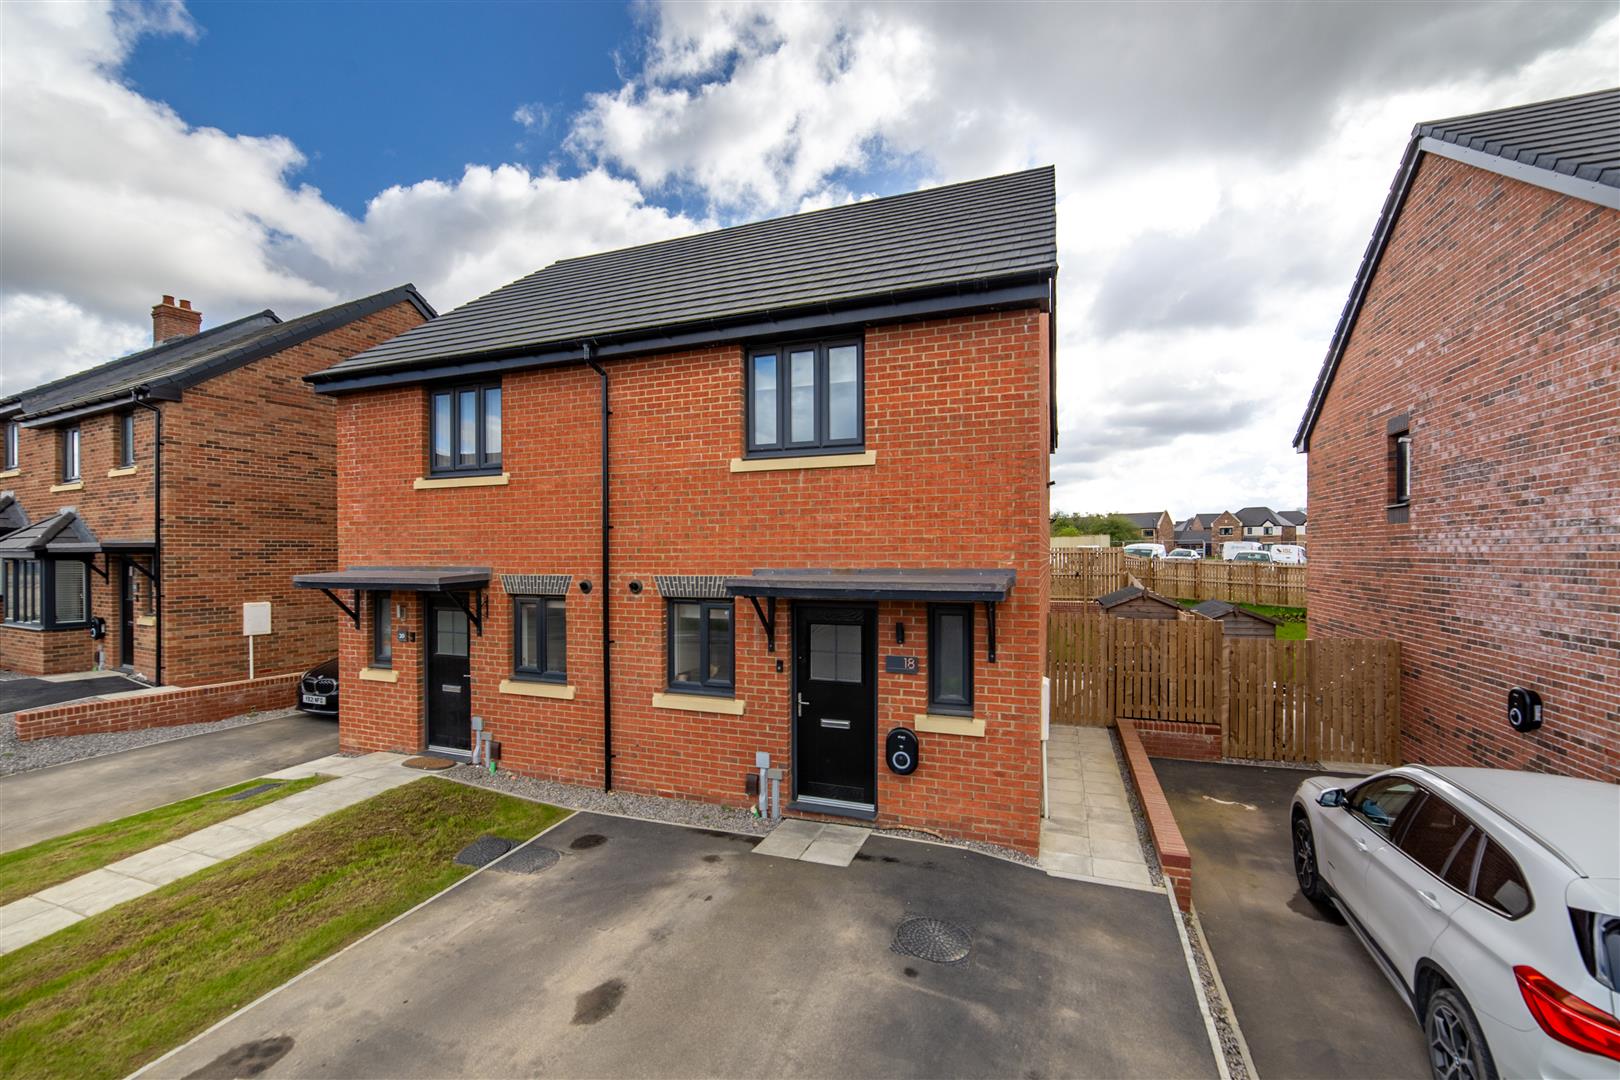 2 bed semi-detached house for sale in Thistle Way, Callerton, NE5 